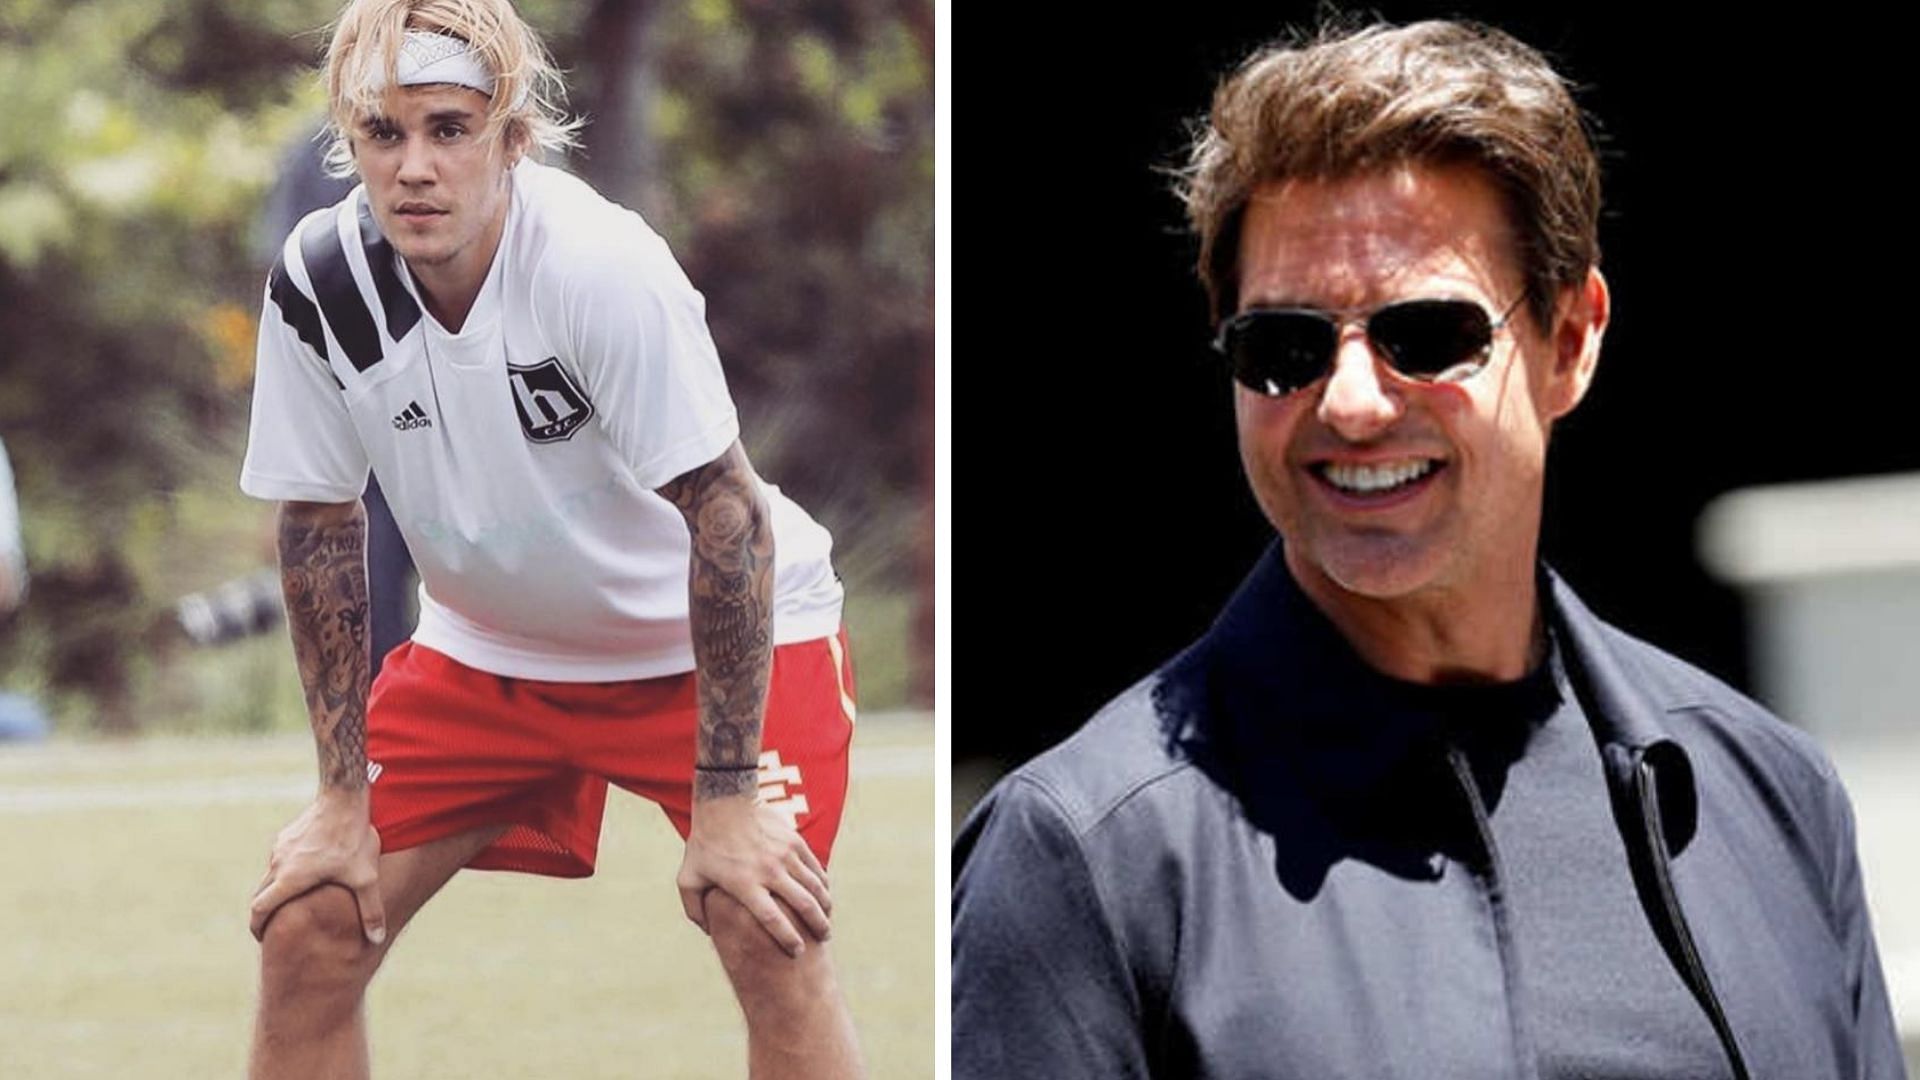 Justin Bieber and Tom Cruise.&nbsp;